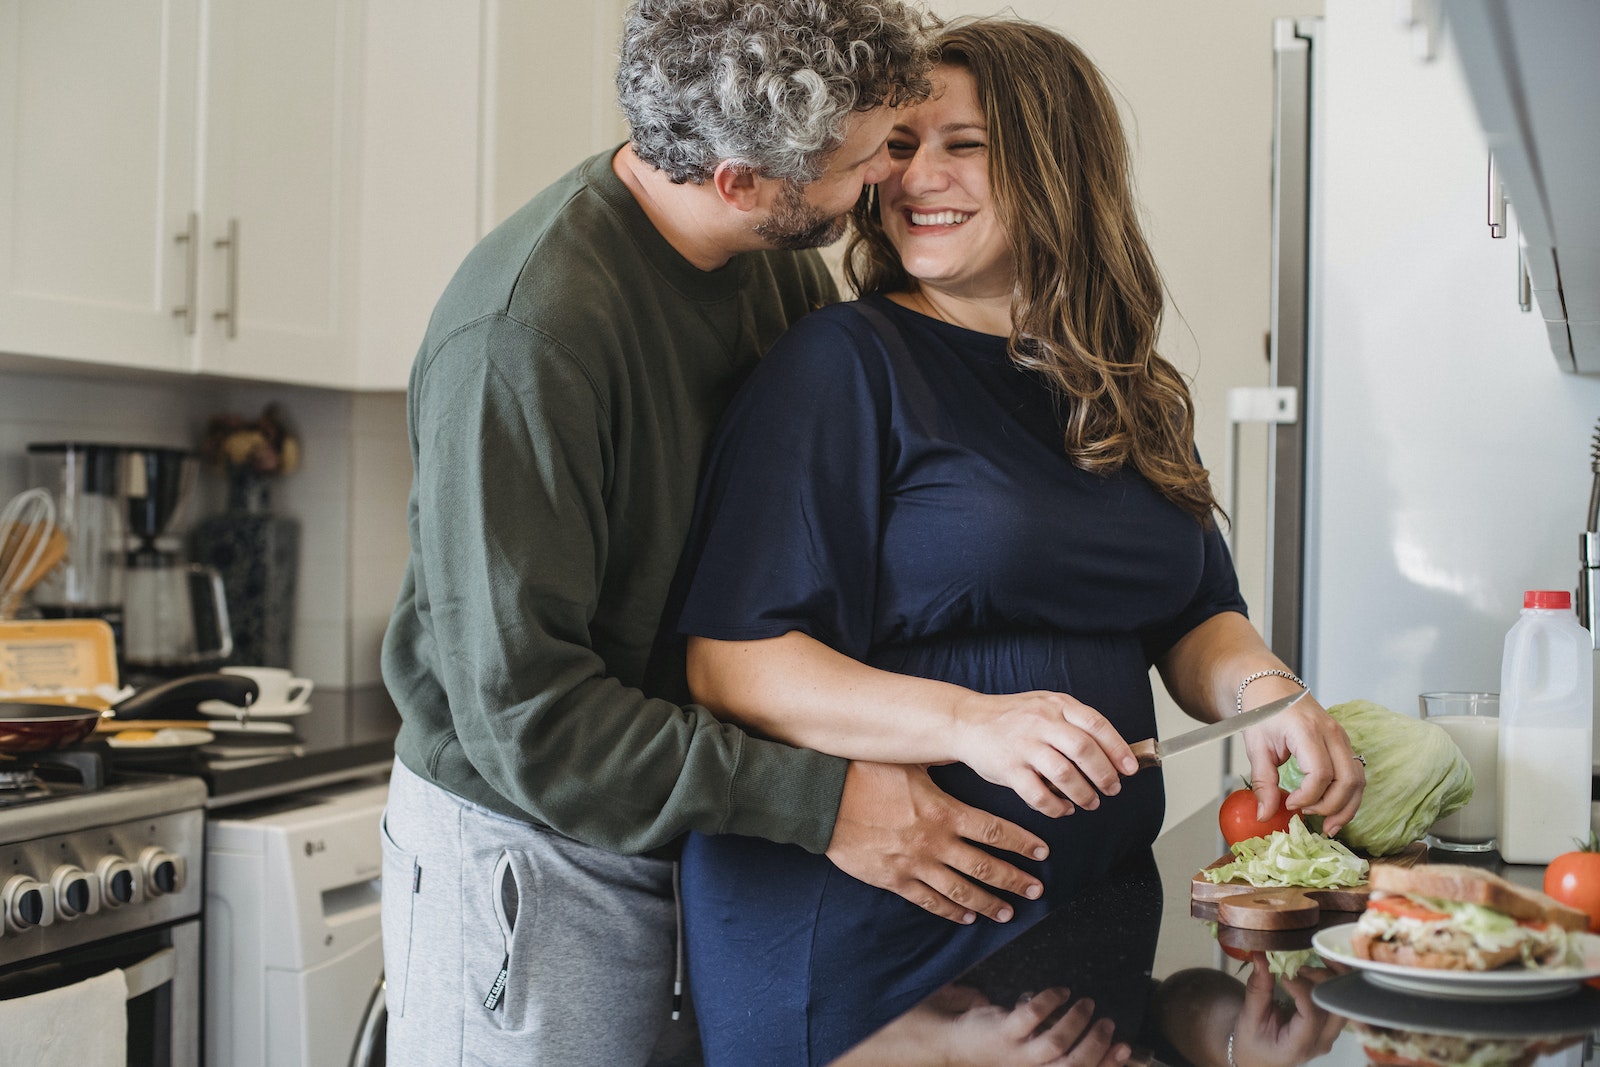 Cheerful pregnant wife in blue dress cooking sandwiches for breakfast while smiling and looking at husband embracing belly in modern kitchen